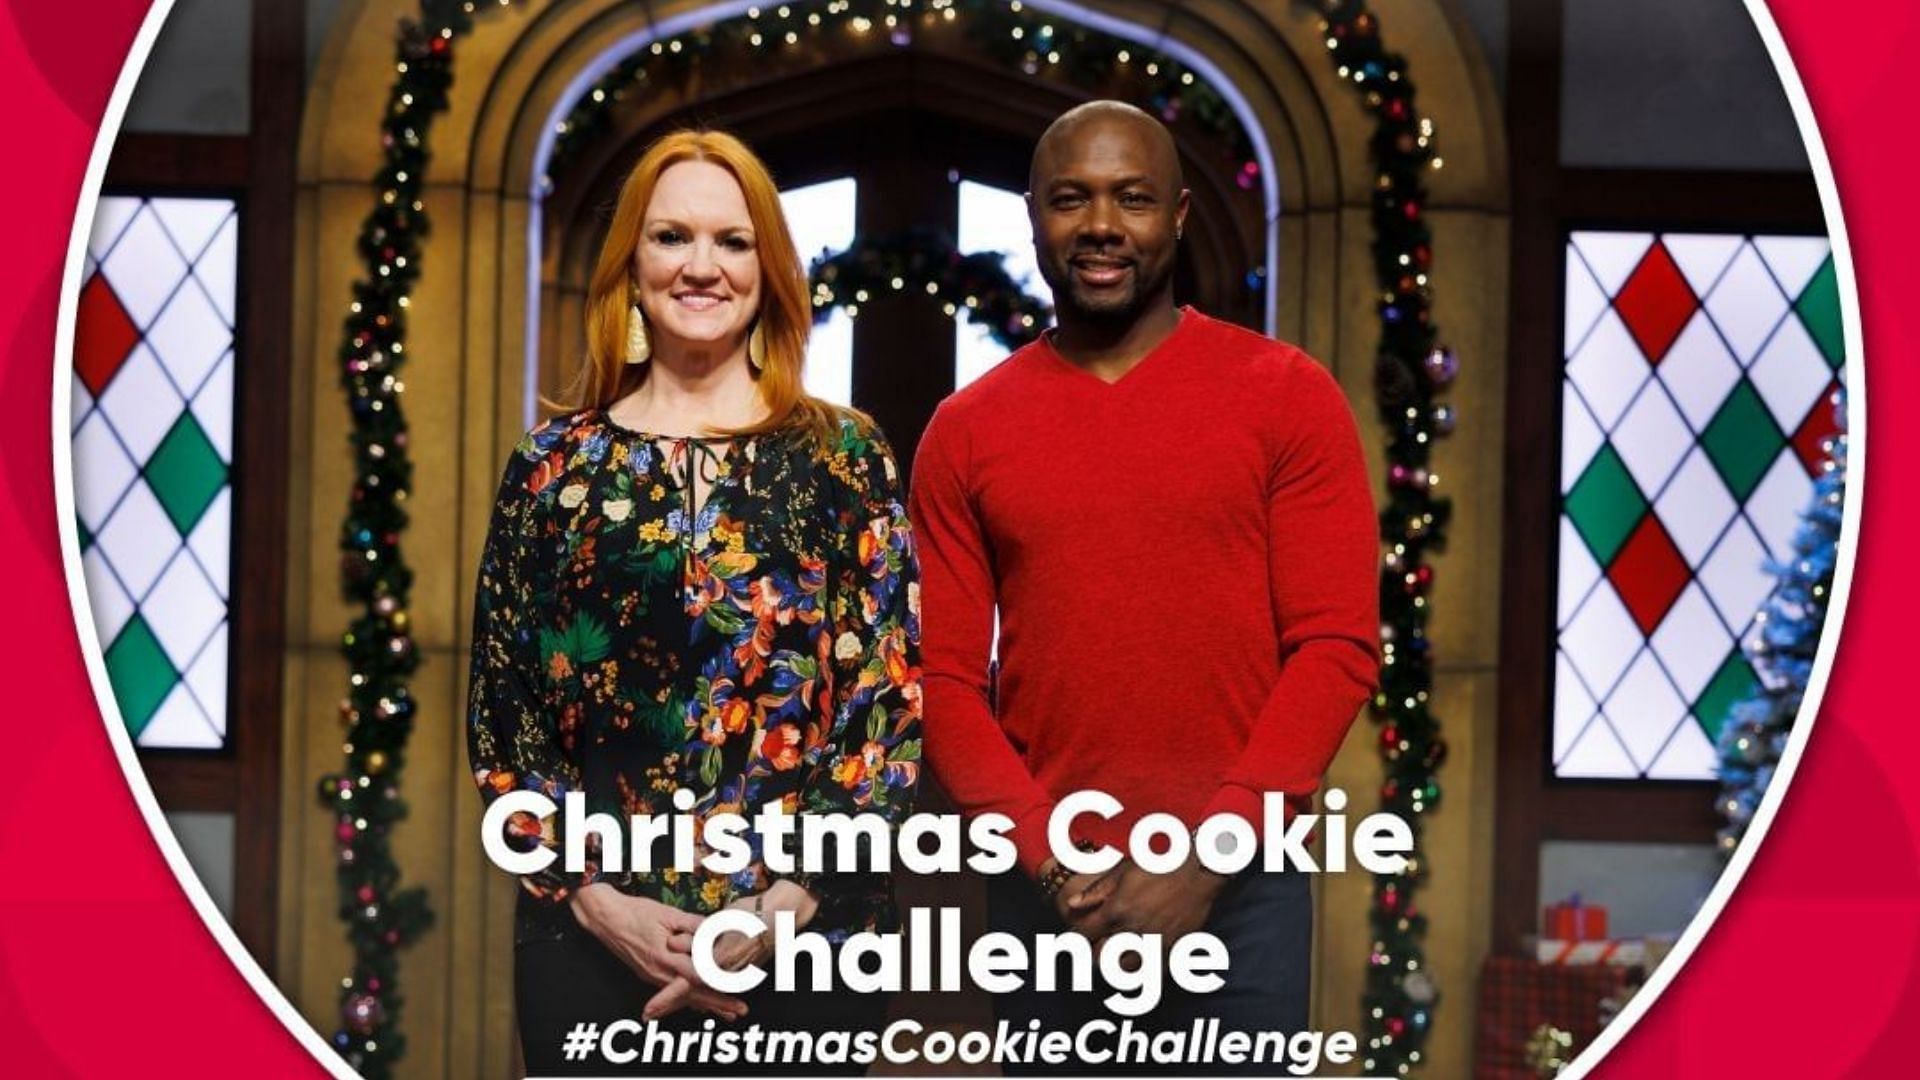 Christmas Cookie Challenge set to premiere on Sunday, November 6